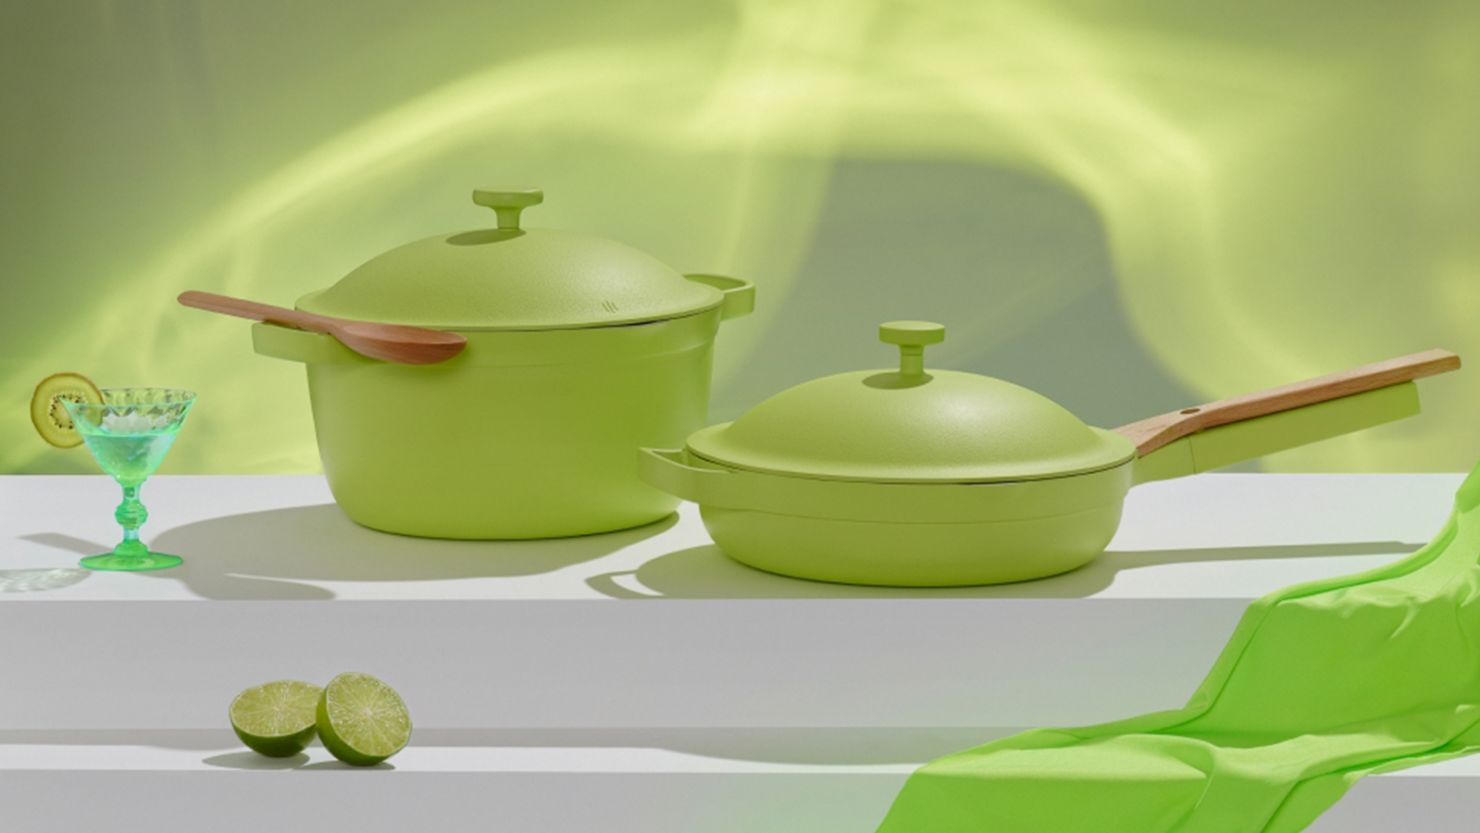 Our Place Dropped a Limited-Edition Always Pan and Steamer Set